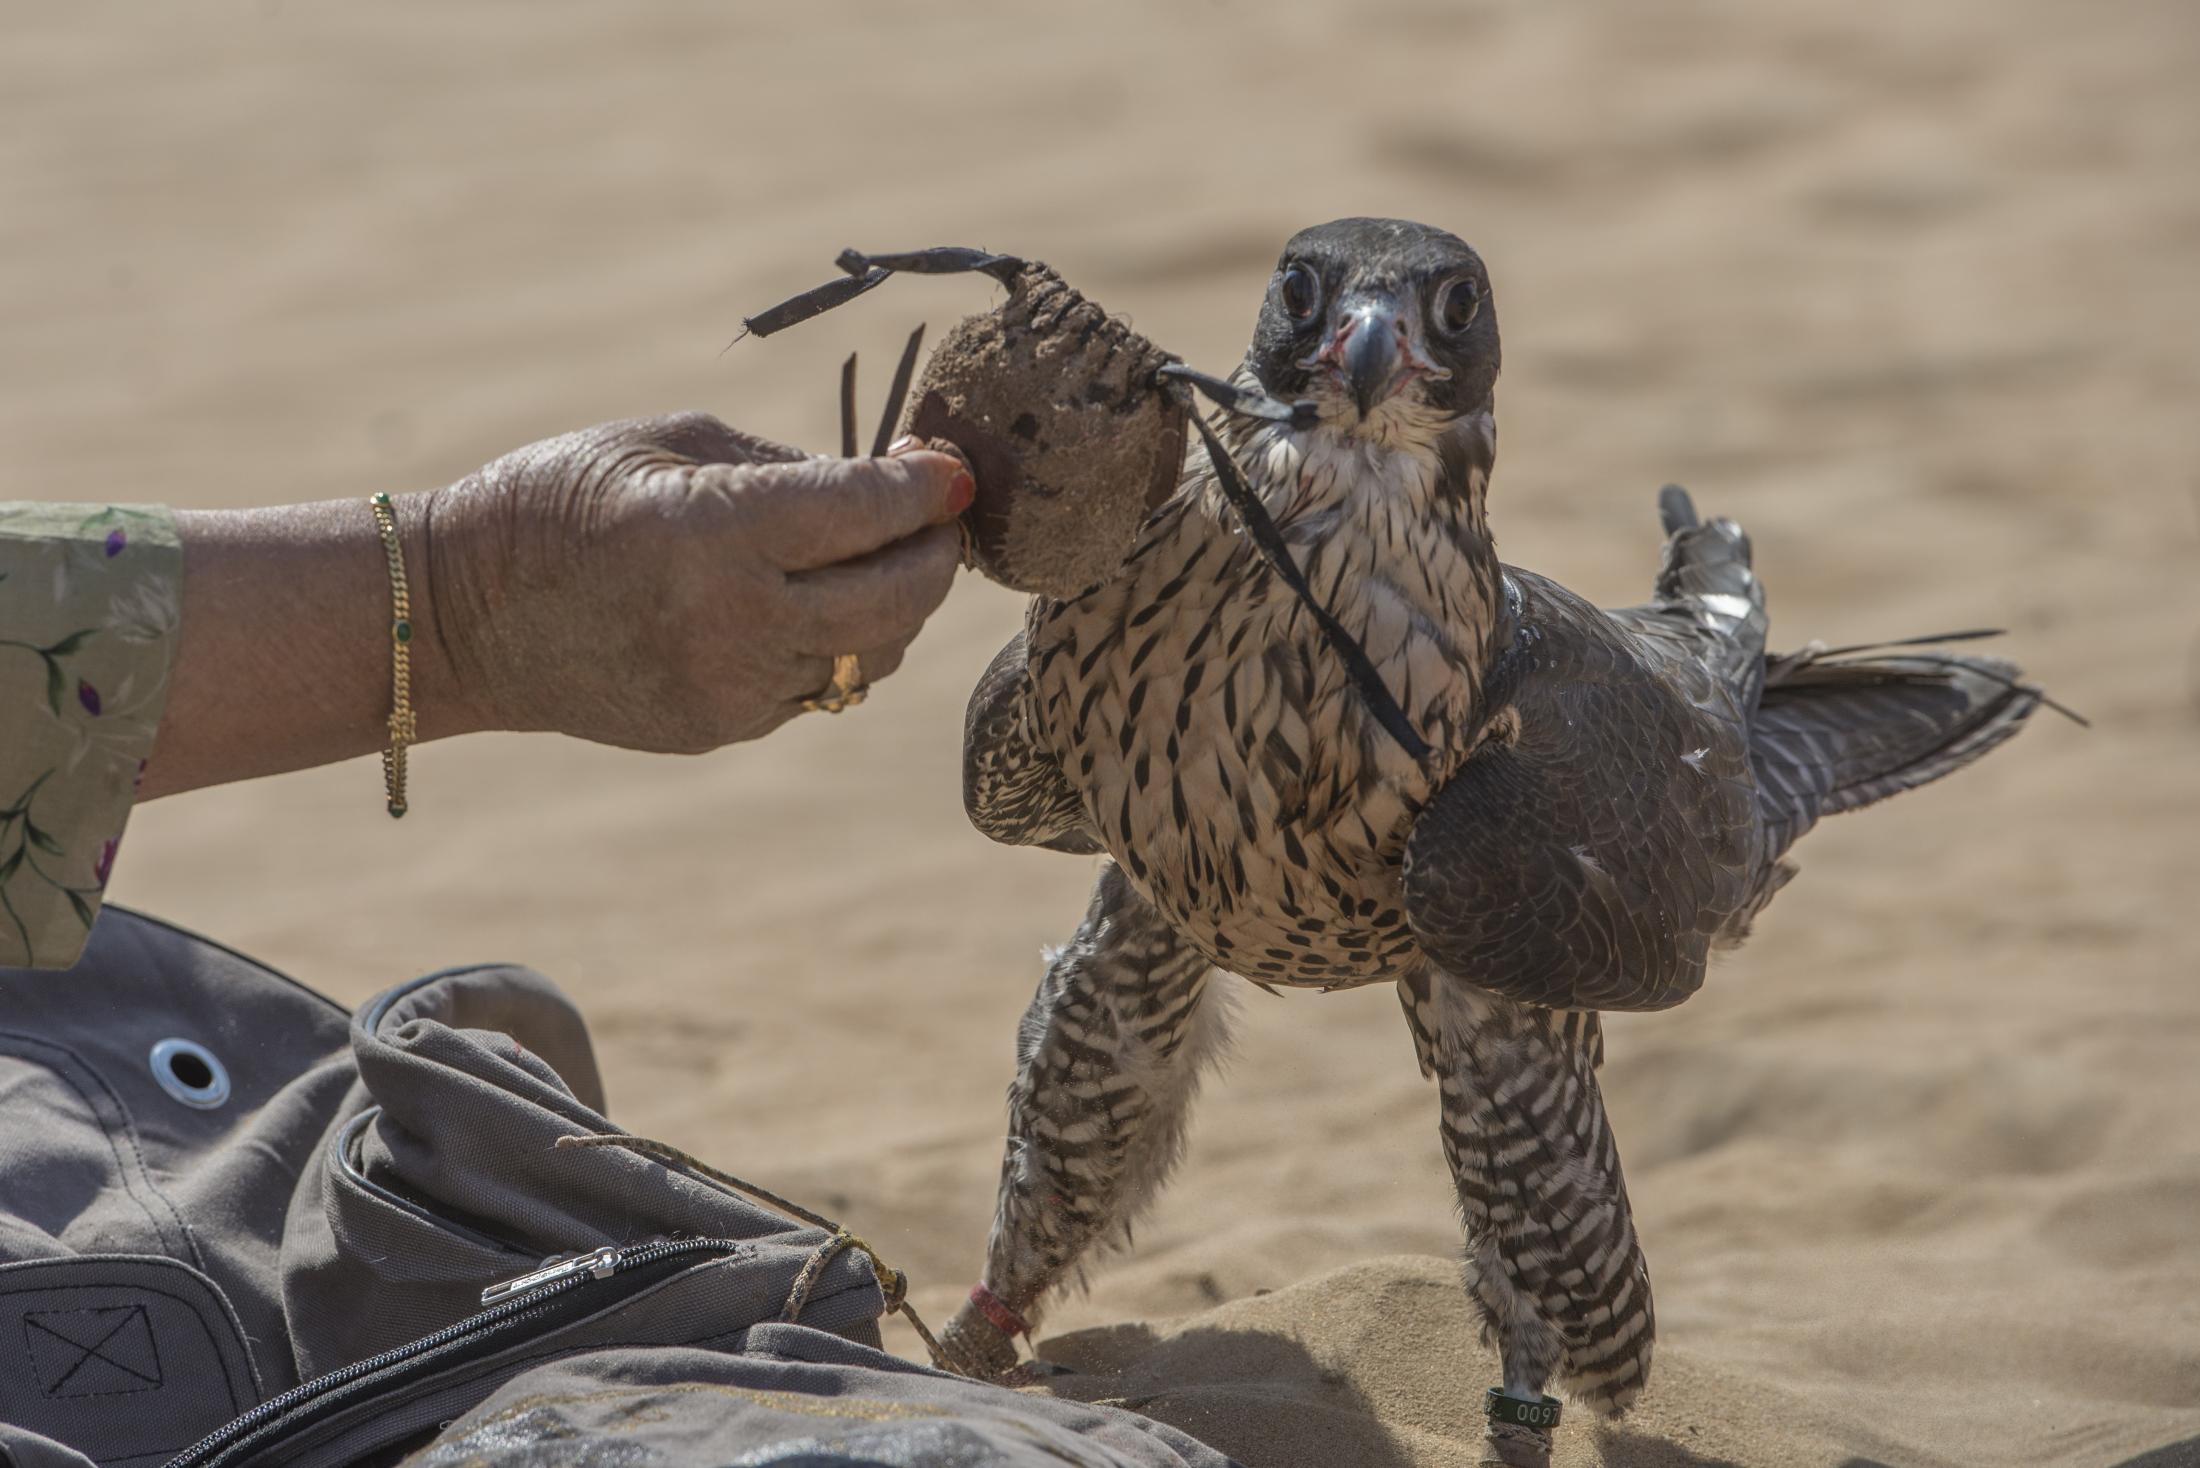 UAE : Women Breaking Stereotypes with Falconry -        Hooding the Falcon     A female falconer...